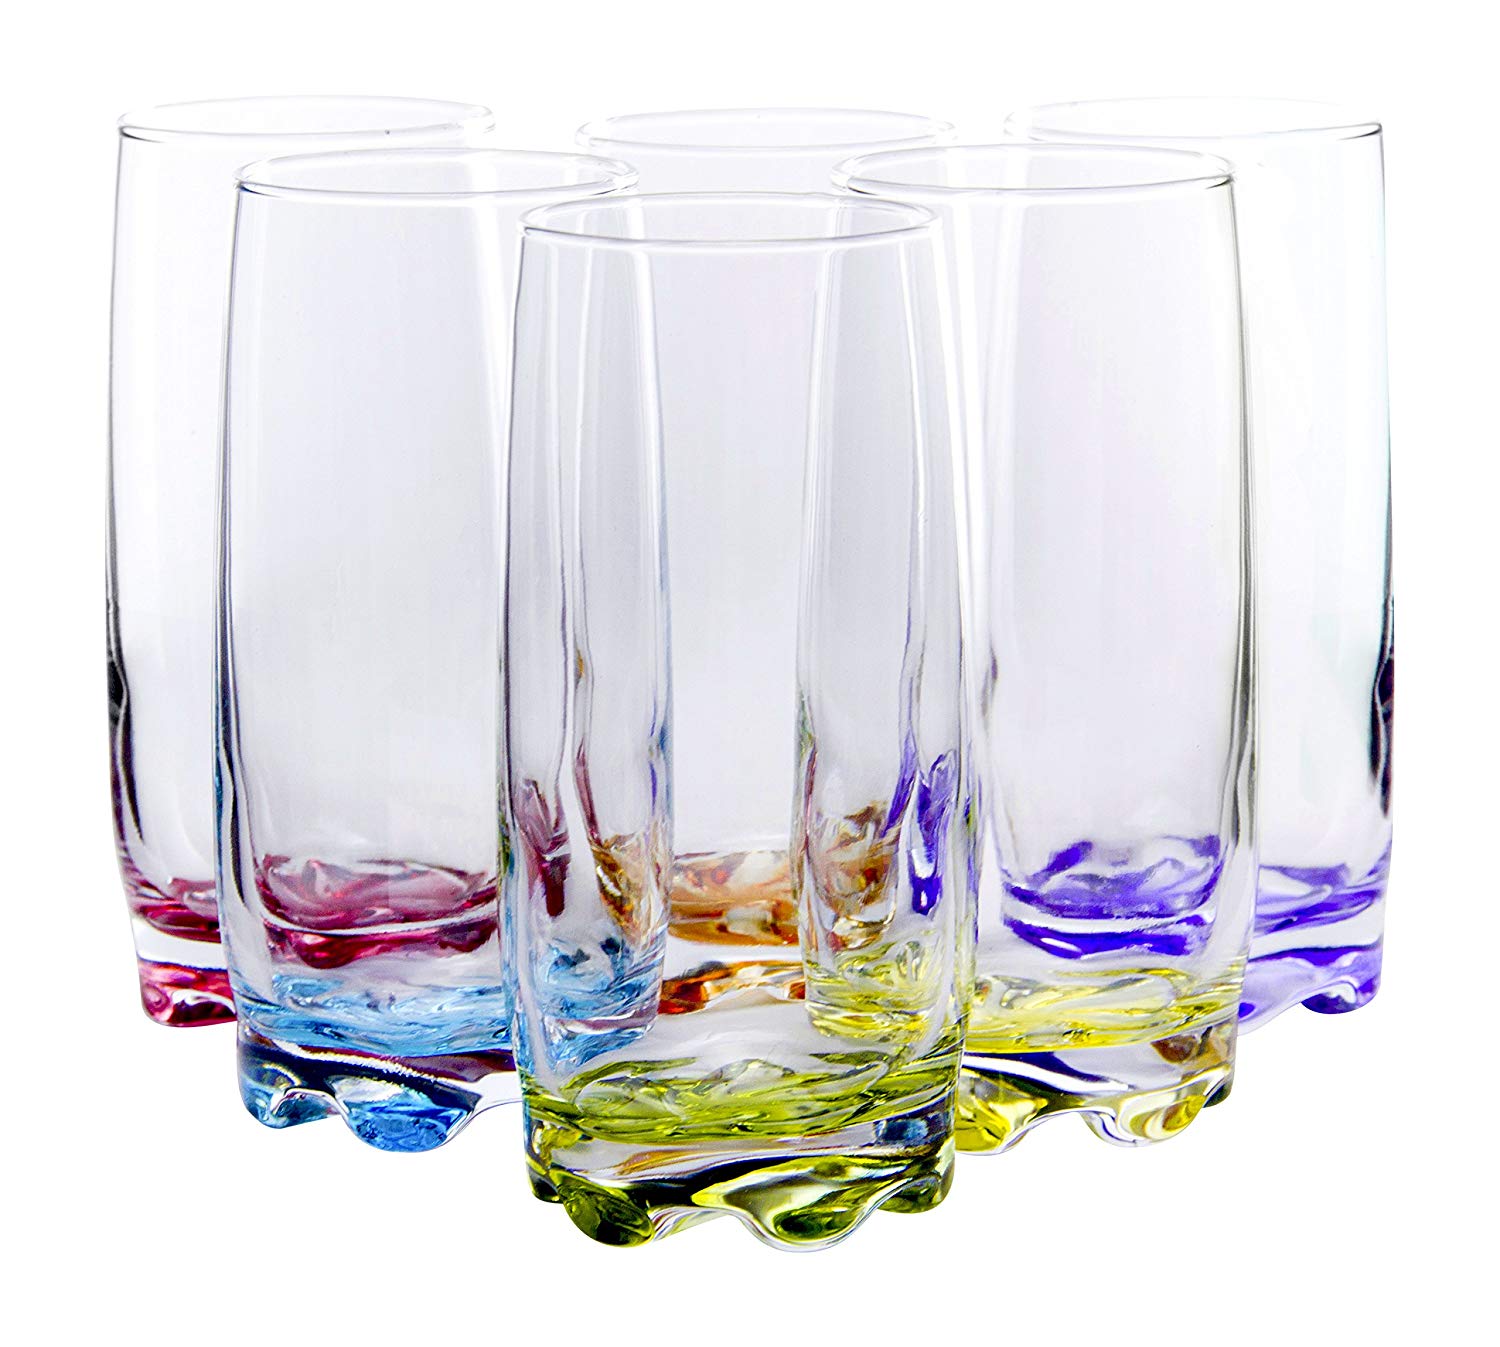 You need one Hiball glass tumbler from Garbo